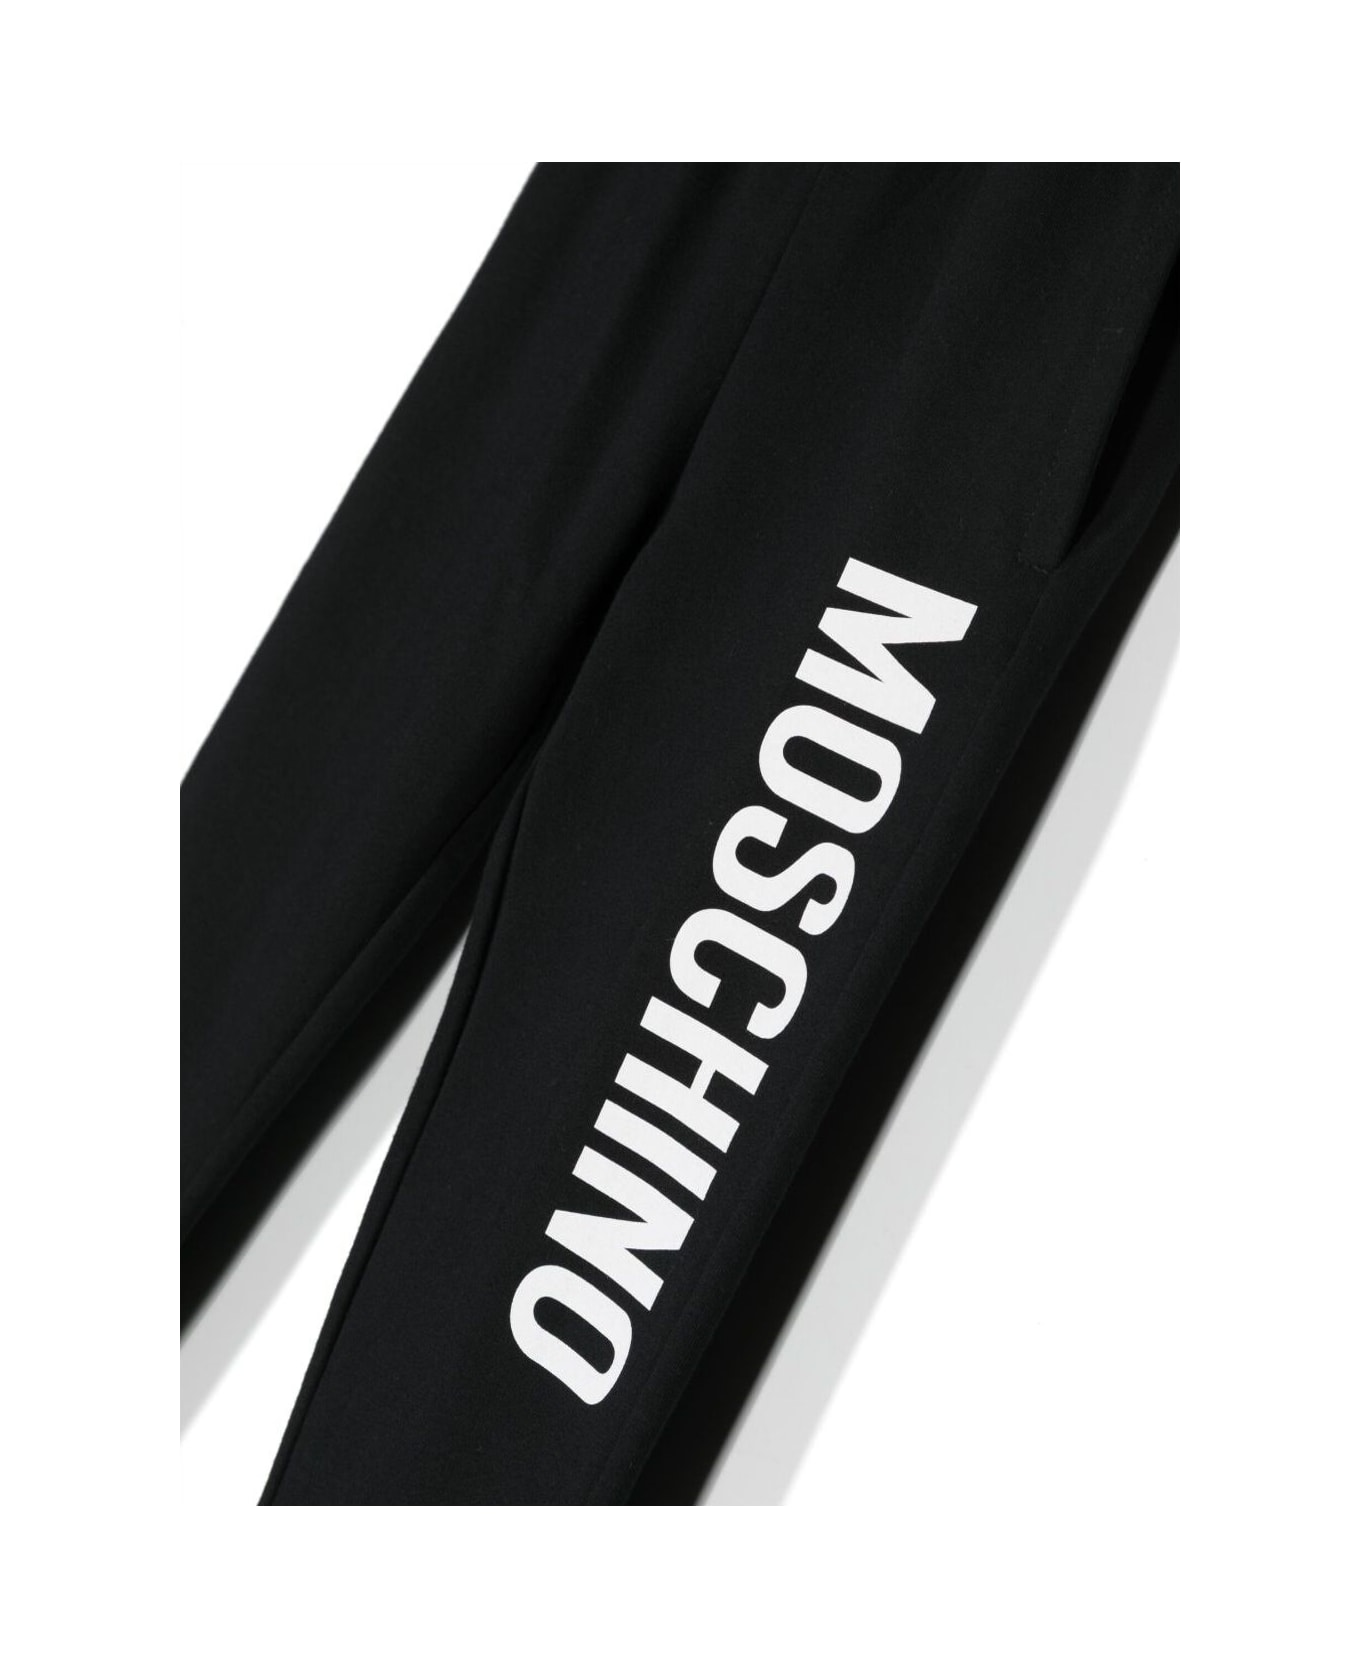 Moschino Black Track Pants And Contrasting Maxi Logo In Stretch Cotton Boy - Nero Black